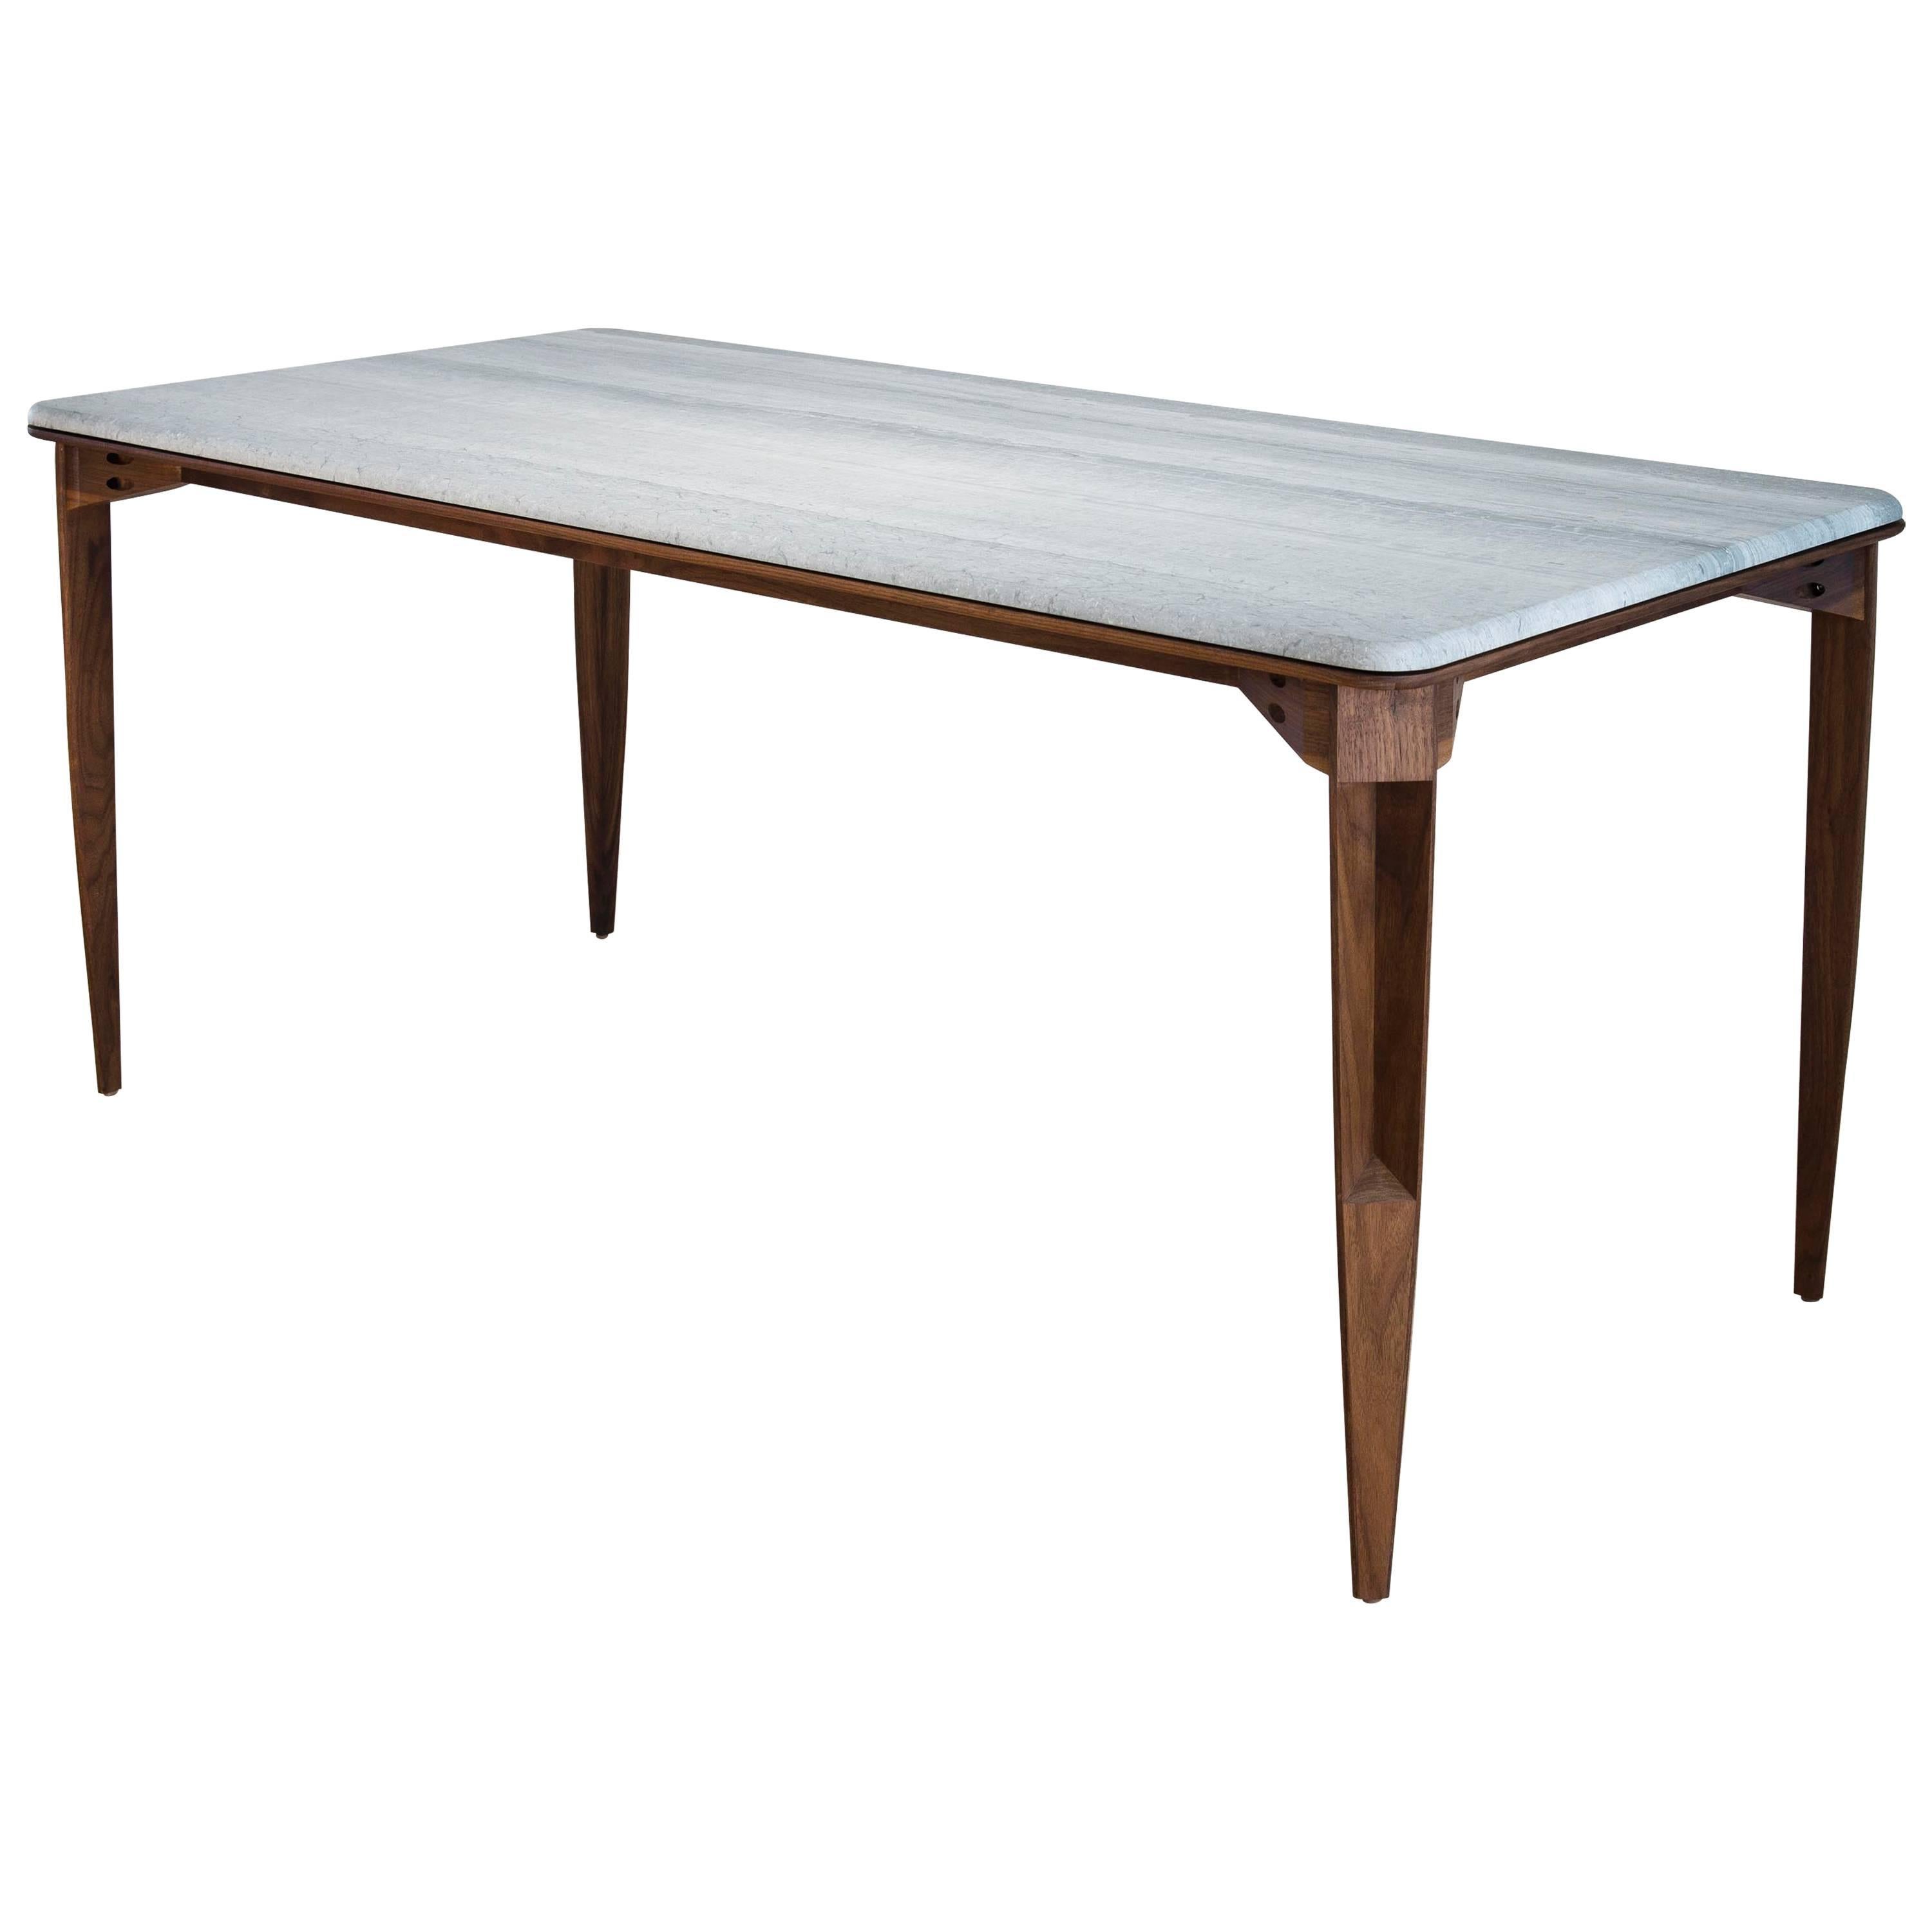 Contemporary Brindle Dining Table, Walnut wood, Honed Marble Top from CBR Studio For Sale